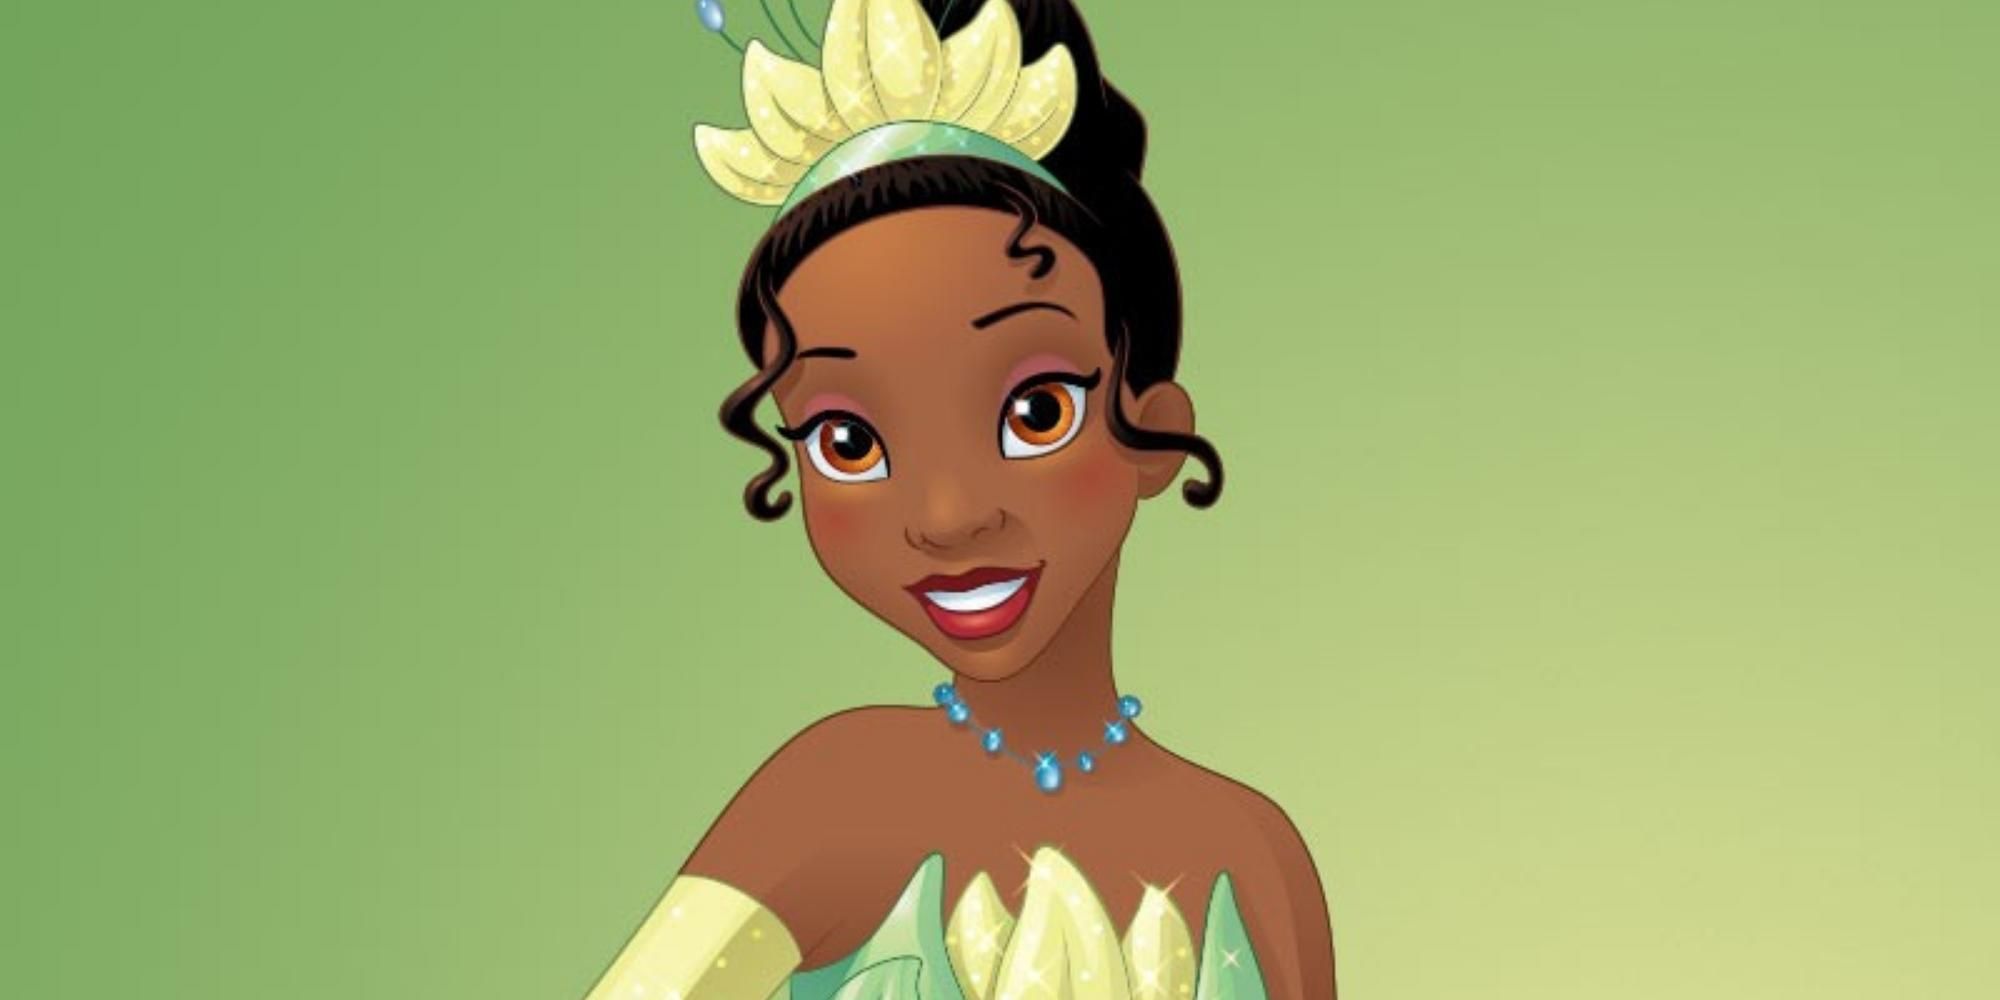 Tiana in The Princess and the Frog